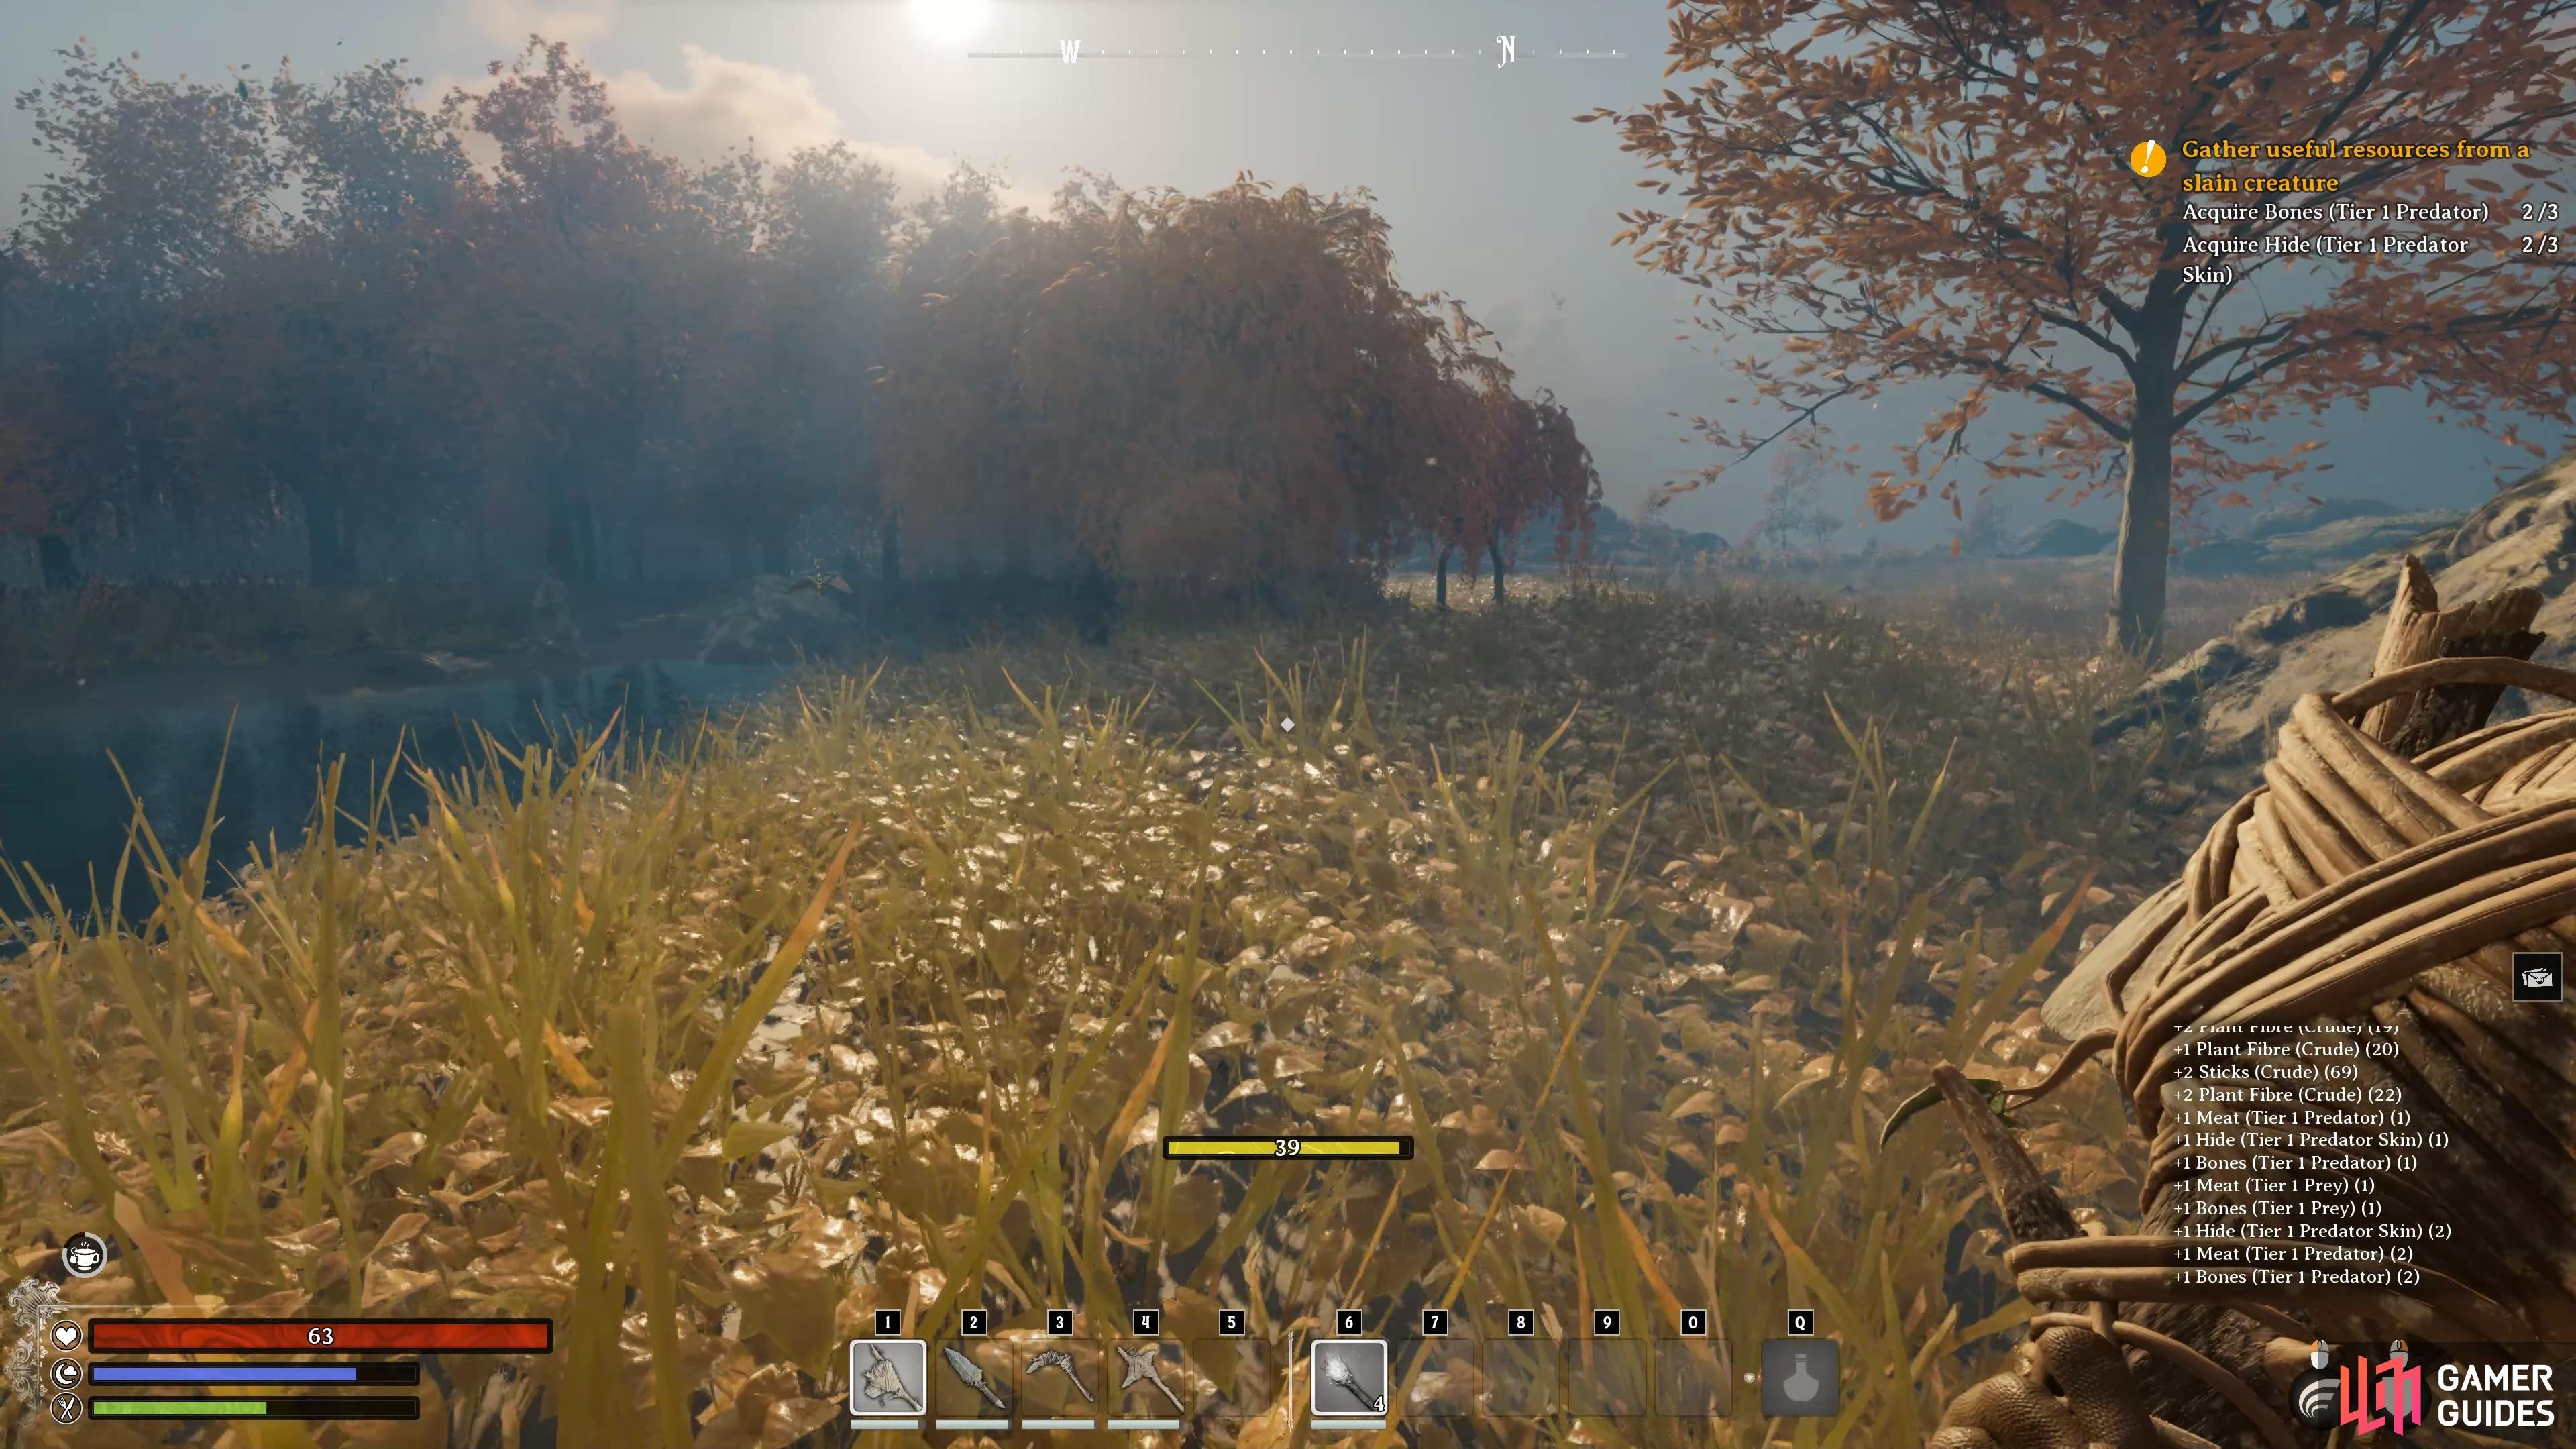 The marshlands of the Swamp biome can be a beautiful yet treacherous place to explore.